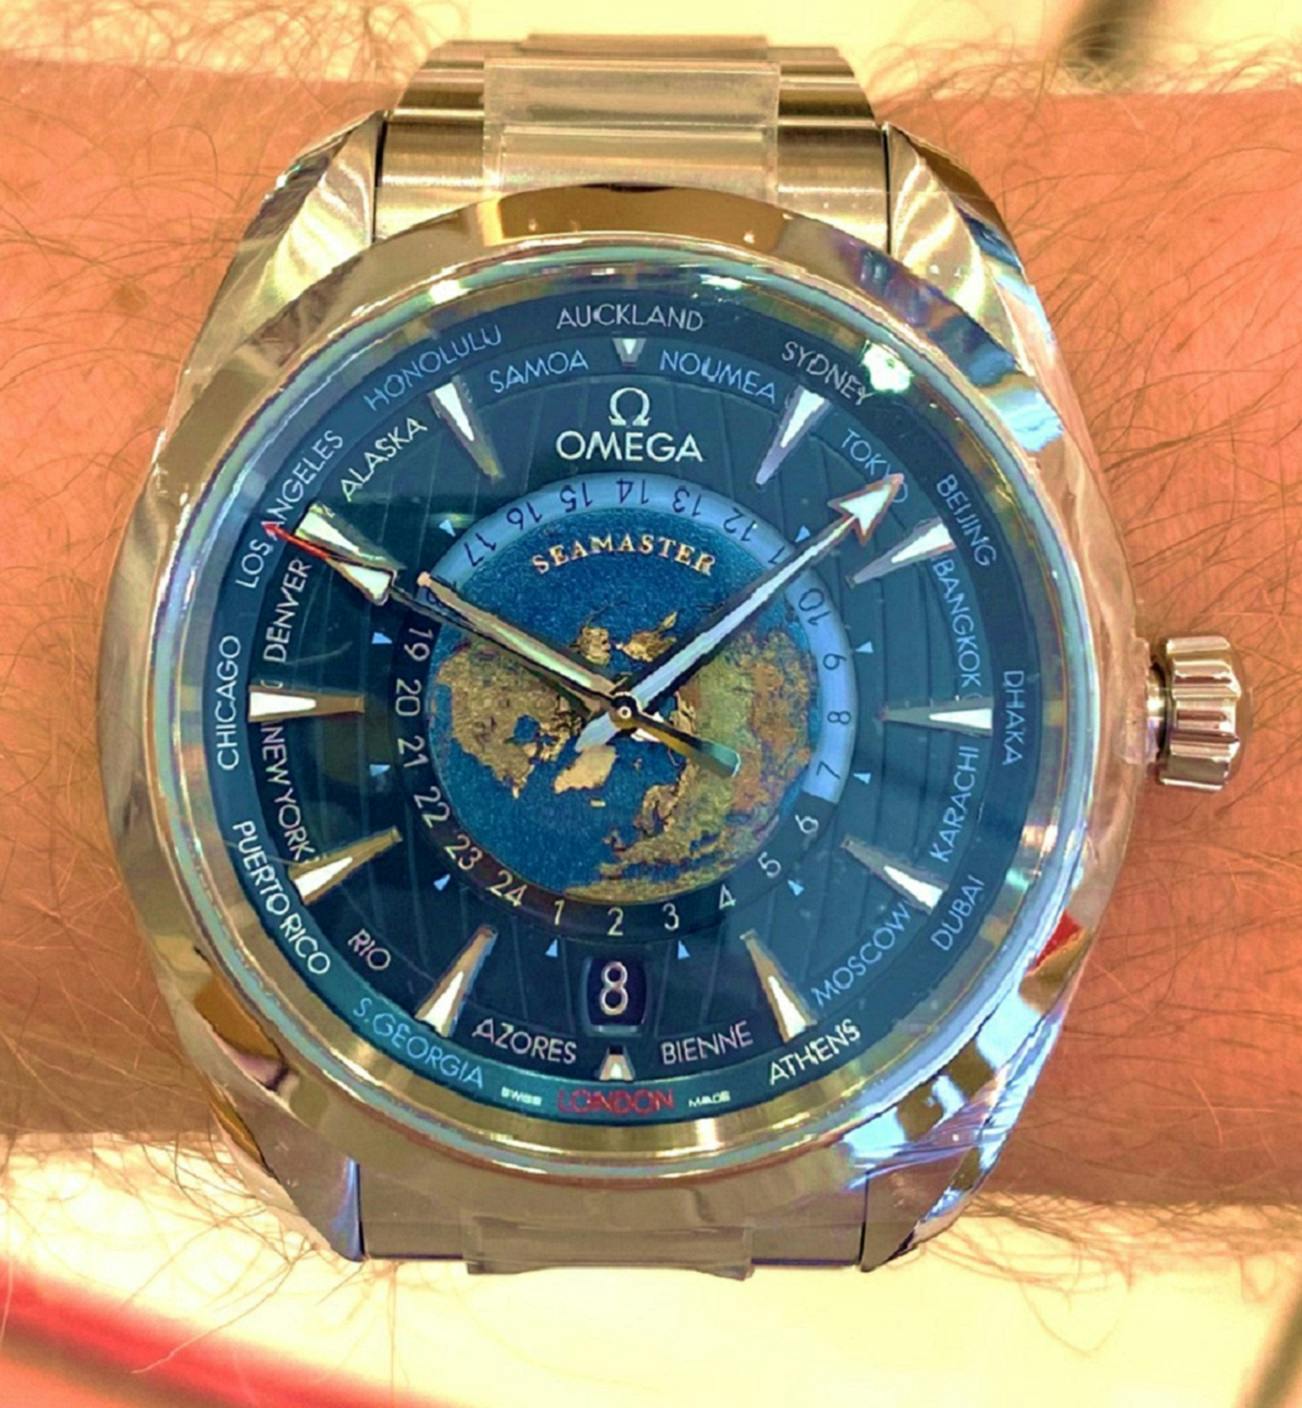 Omega Seamaster Aqua Terra Worldtimer watch in steel with blue dial and map of the world in the centre